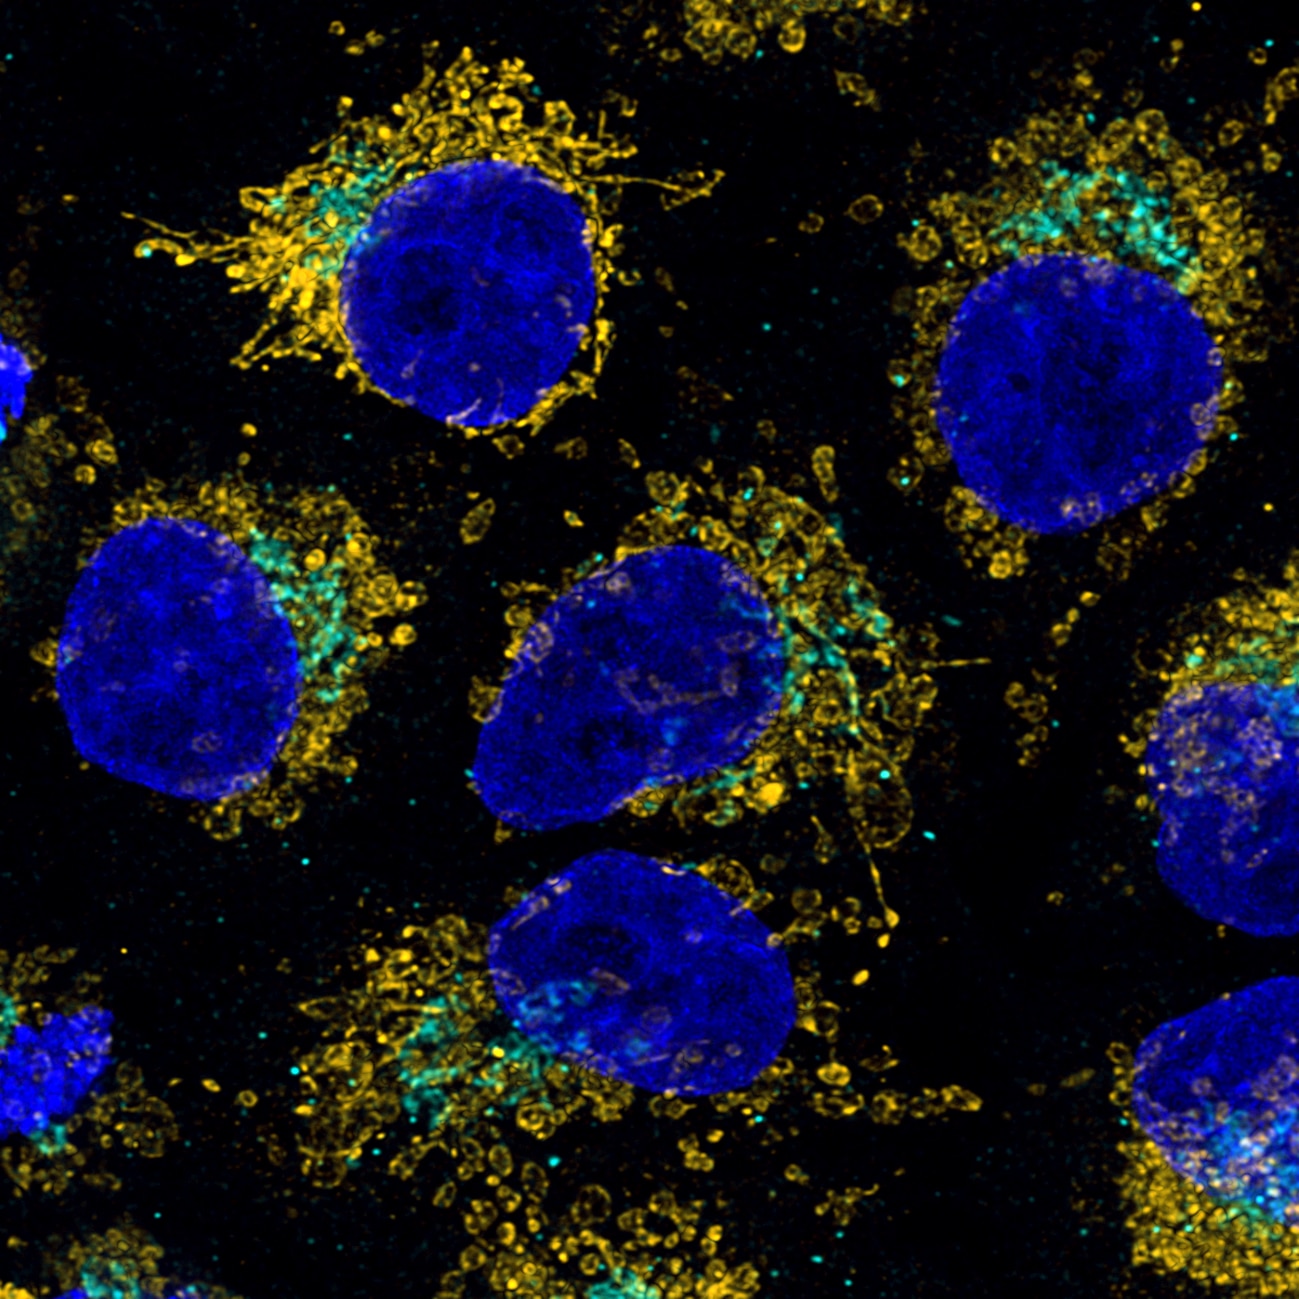 Immunofluorescence of HeLa: PFA-fixed HeLa cells were stained with anti-HSP60 antibody (66041-1-Ig) labeled with FlexAble CoraLite® Plus 555 Kit (KFA022, yellow), anti-GORASP2 antibody (66627-1-Ig) labeled with FlexAble CoraLite® Plus 647 Kit (KFA023, cyan) and DAPI (blue). Confocal images were acquired with a 100x oil objective and post-processed. Images were recorded at the Core Facility Bioimaging at the Biomedical Center, LMU Munich.